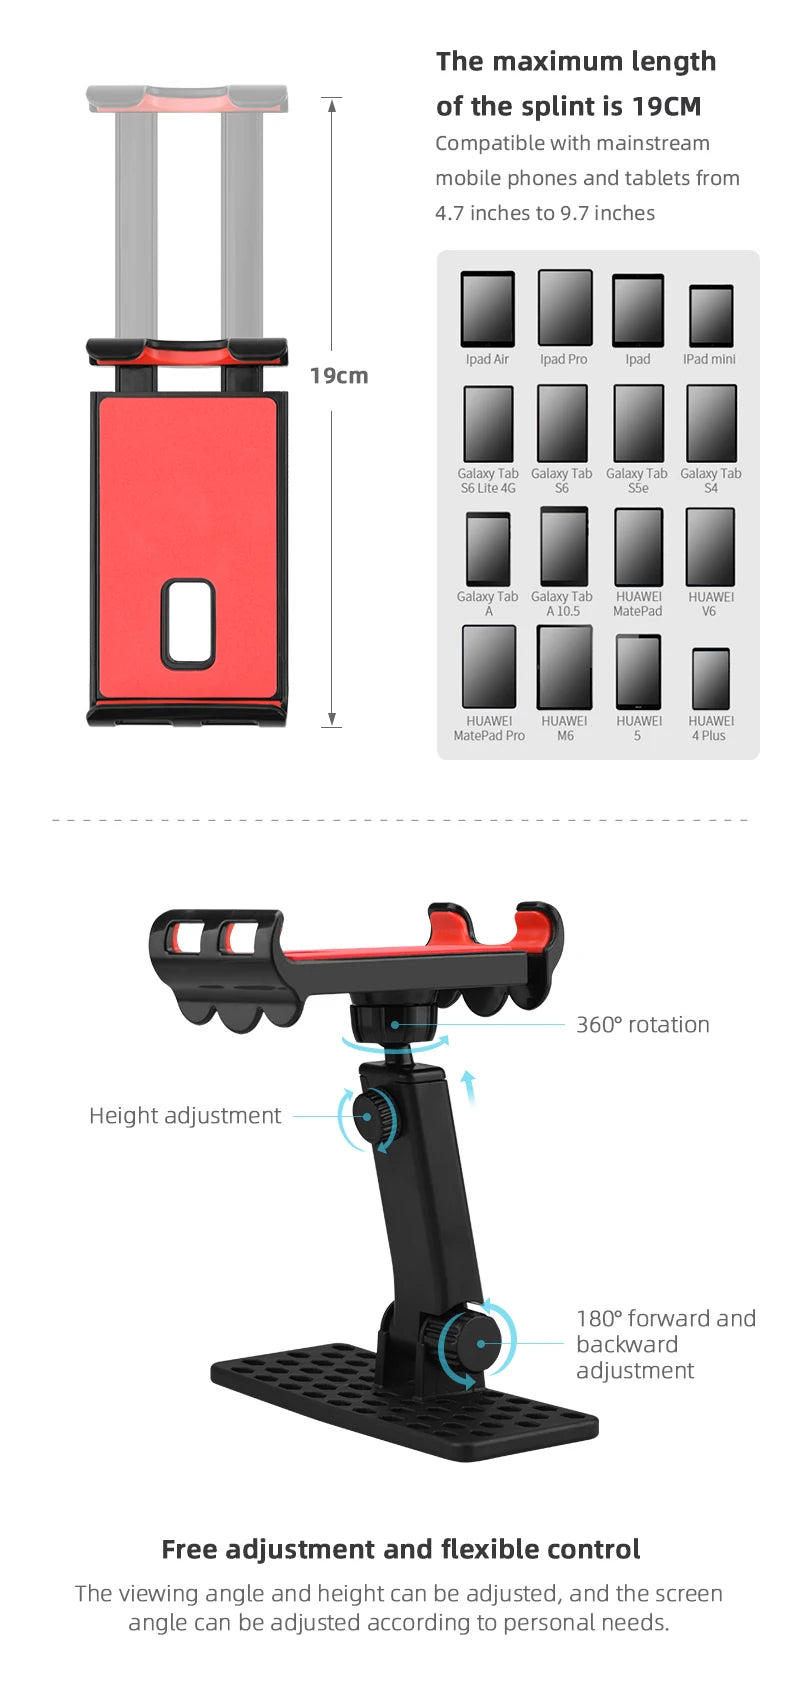 Tablet Phone Bracket Mount Holder, the maximum length of the splint is 19CM Compatible with mainstream mobile phones and tablets